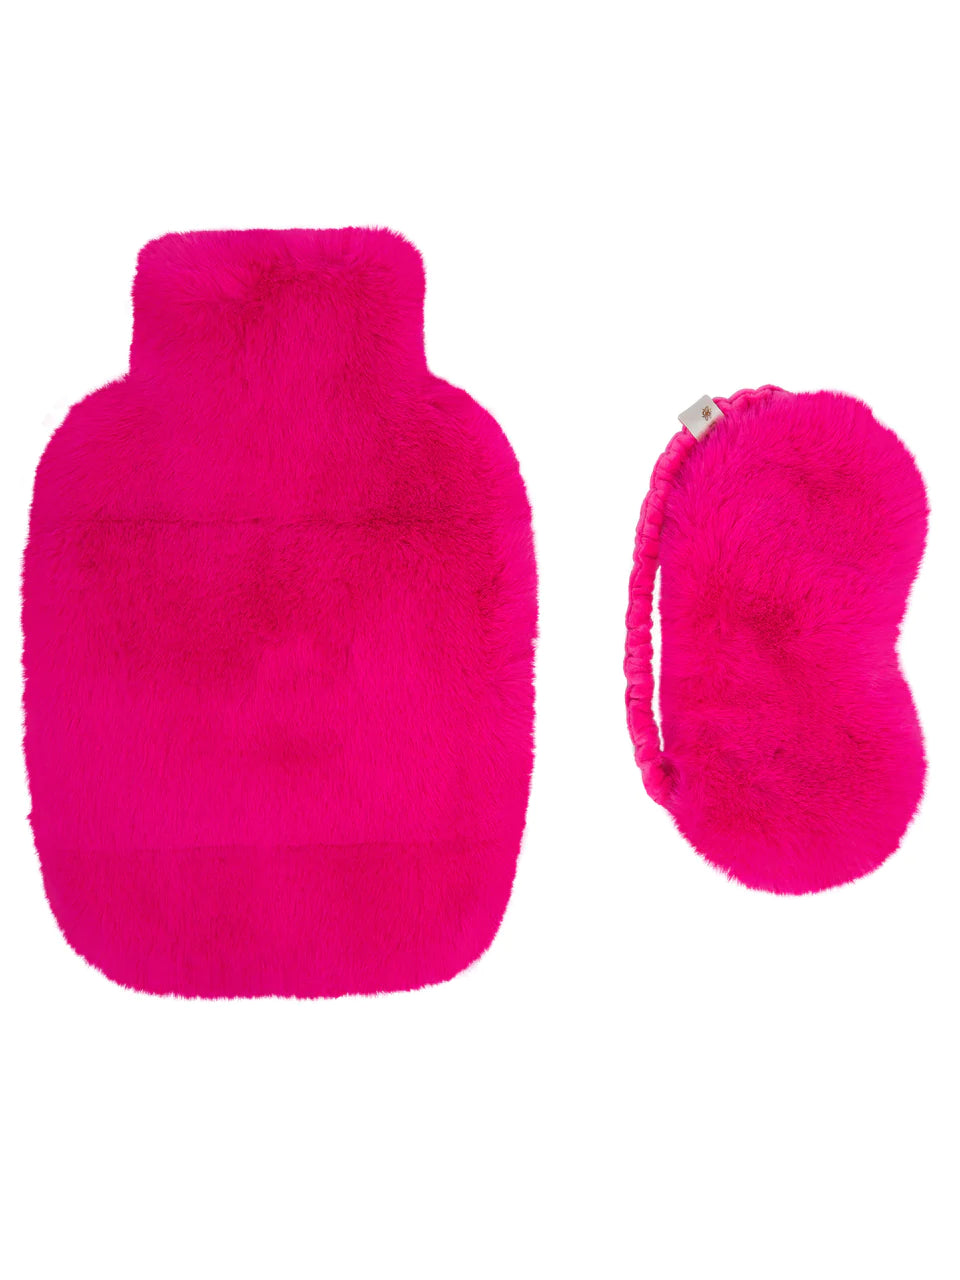 Hot pink faux fur hot water bottle cover and eye mask with rubber hot water bottle included